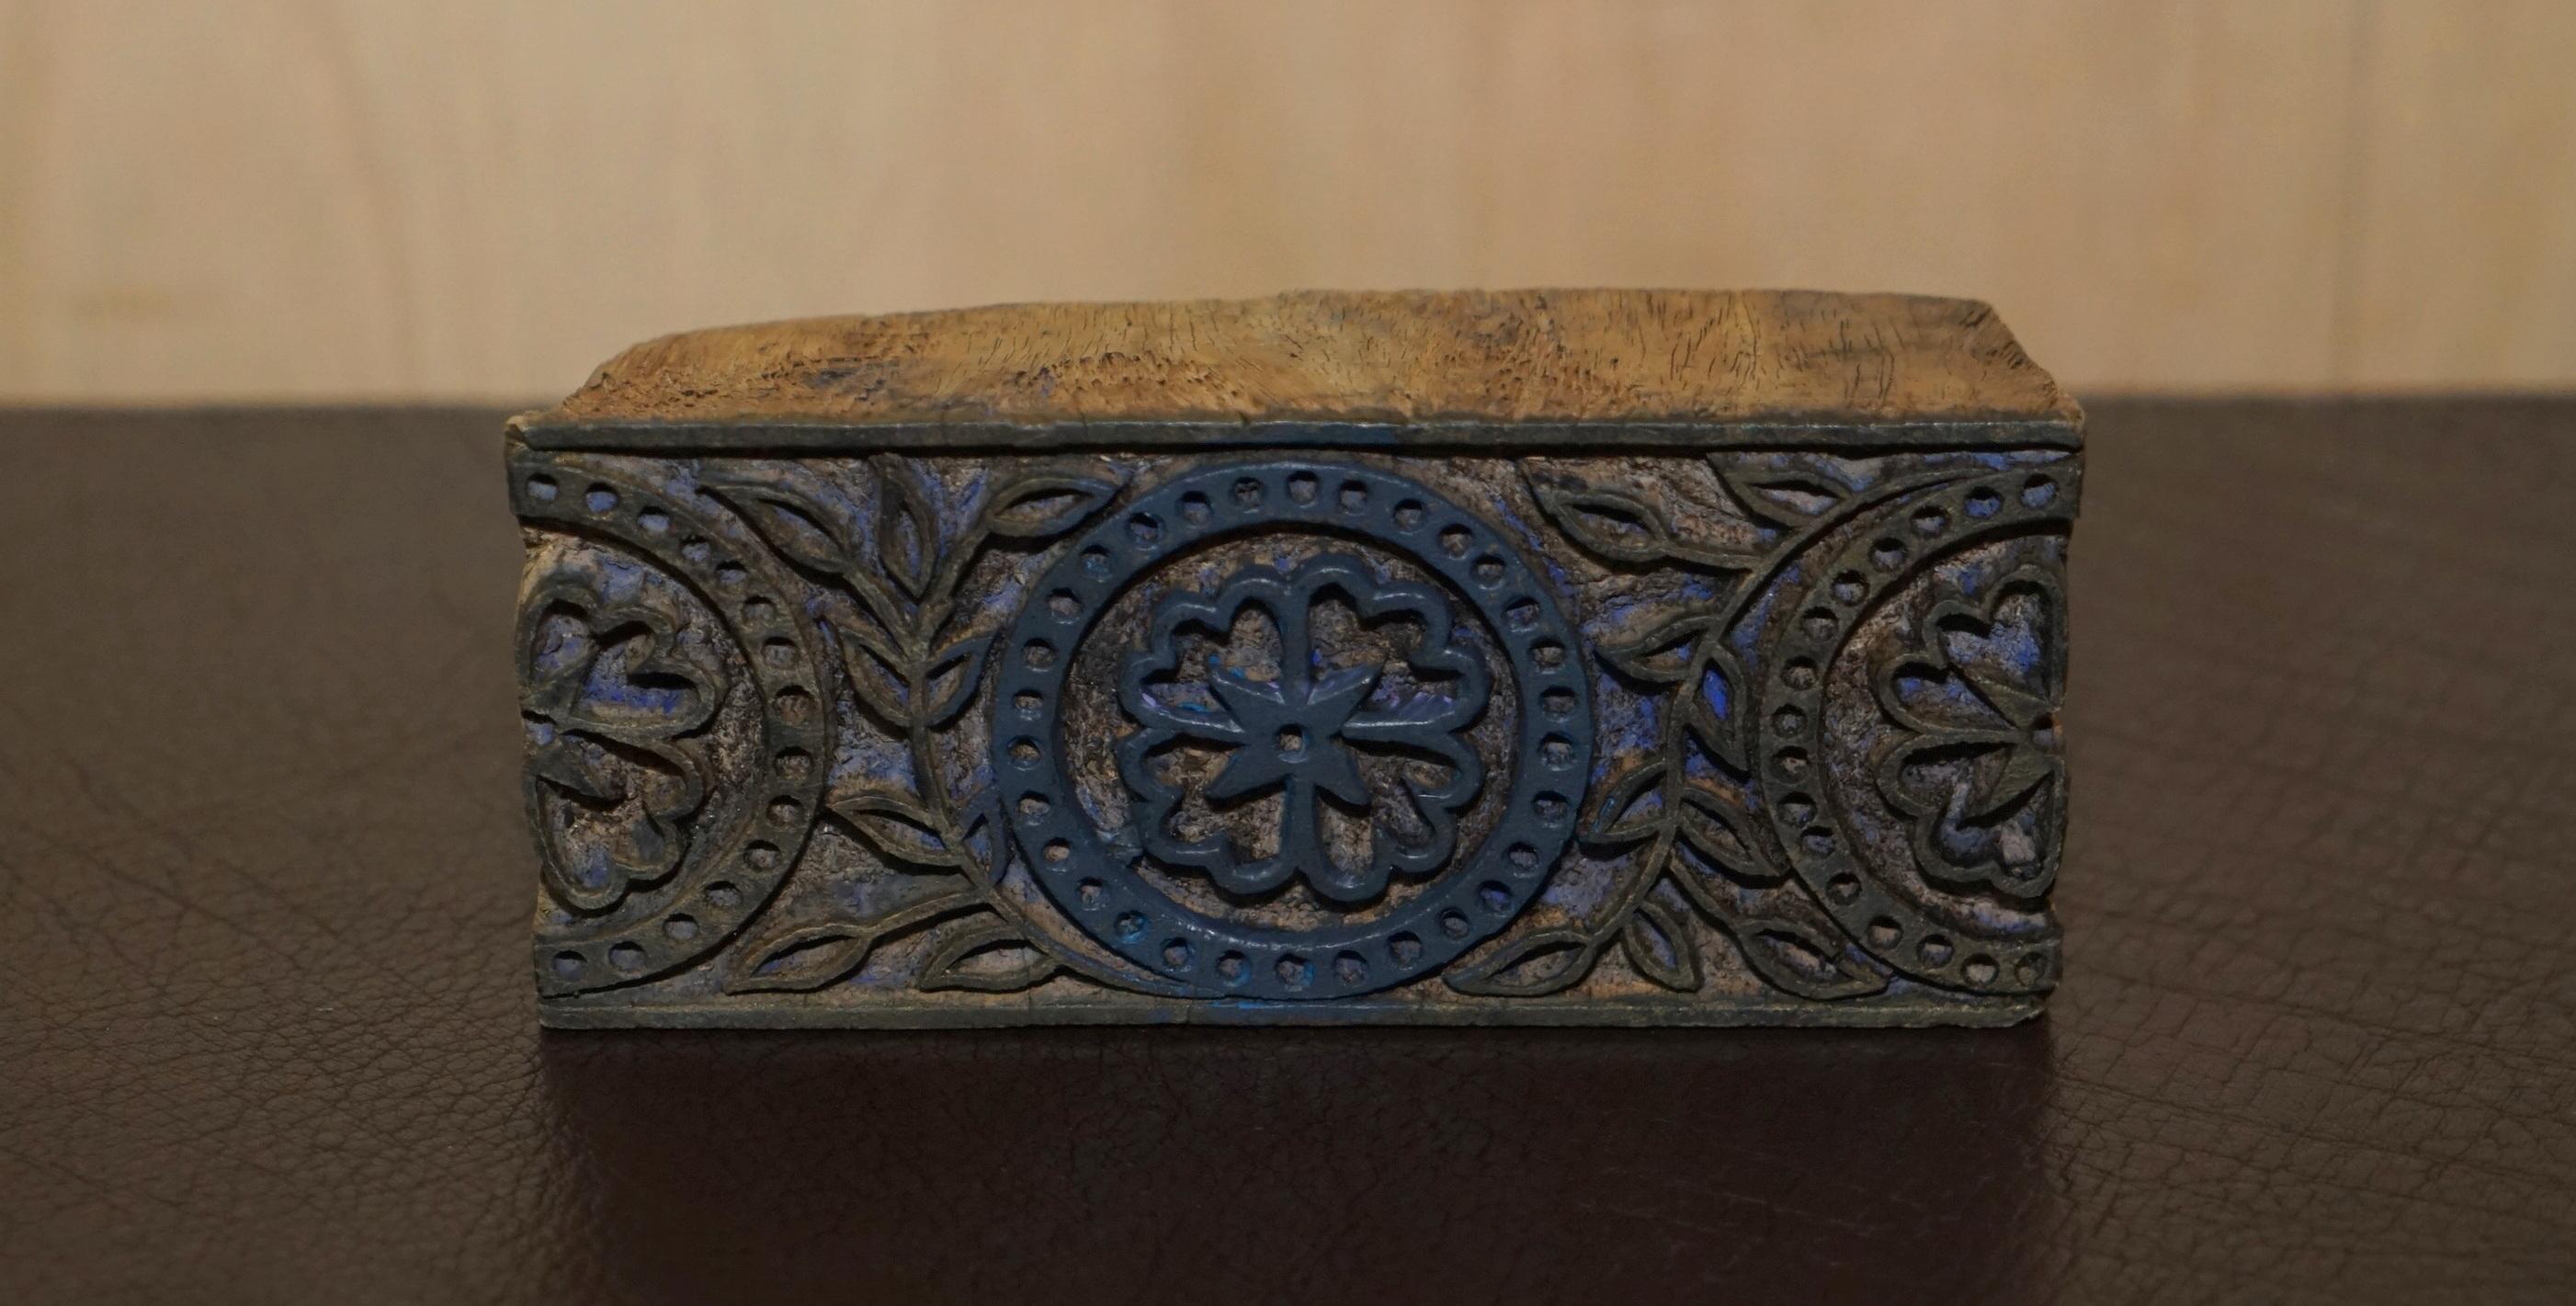 We are delighted to offer for sale this hand carved in sycamore wood printing block with blue flower detail

This piece is part of a suite, I have around ten in stock, this sale is for the one piece detailed above, all other pieces are listed